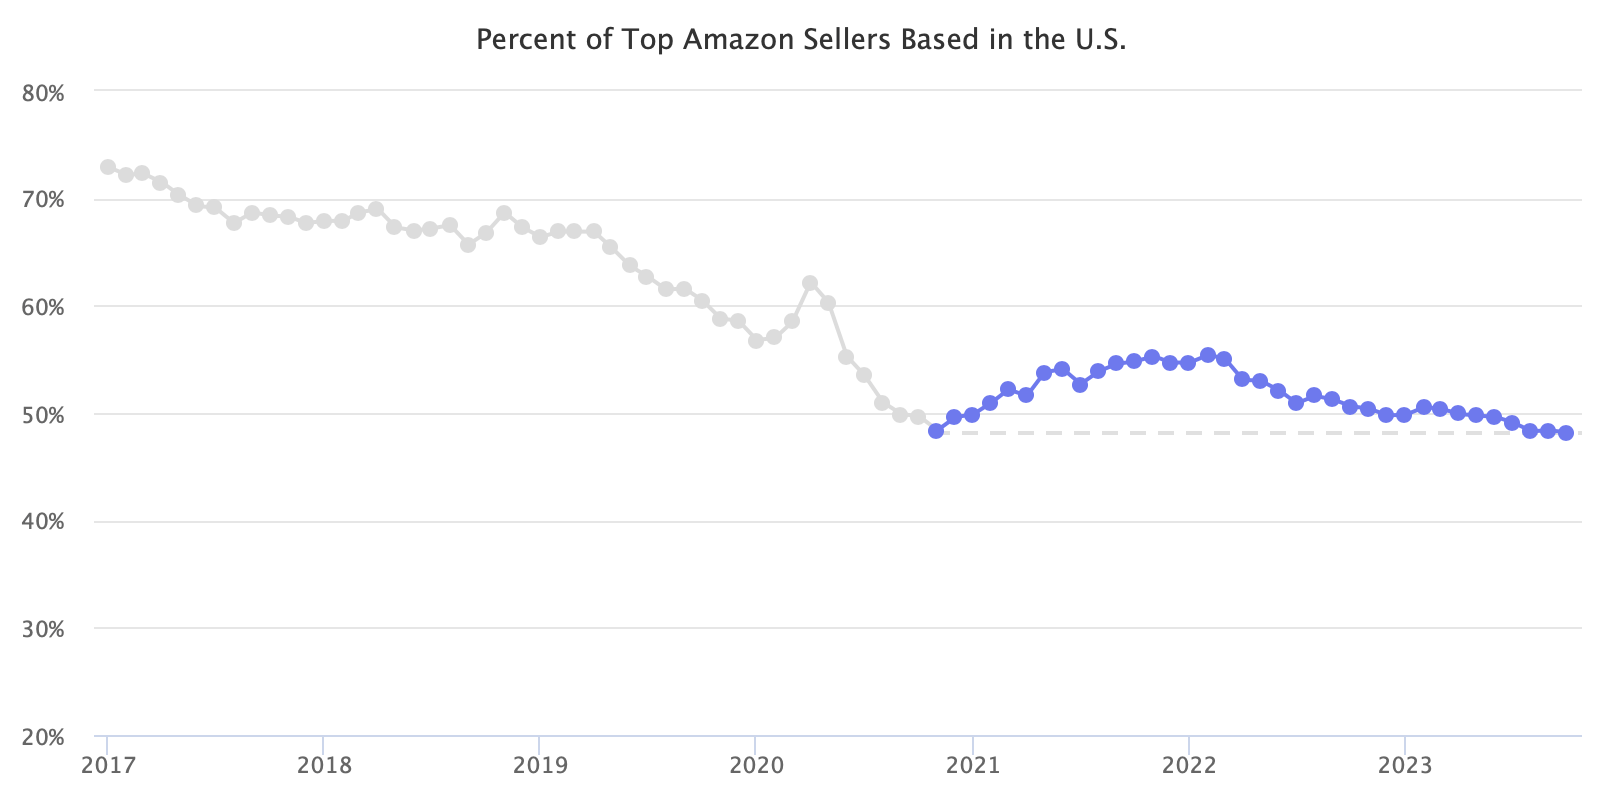 Percent of Top Amazon Sellers Based in the U.S.